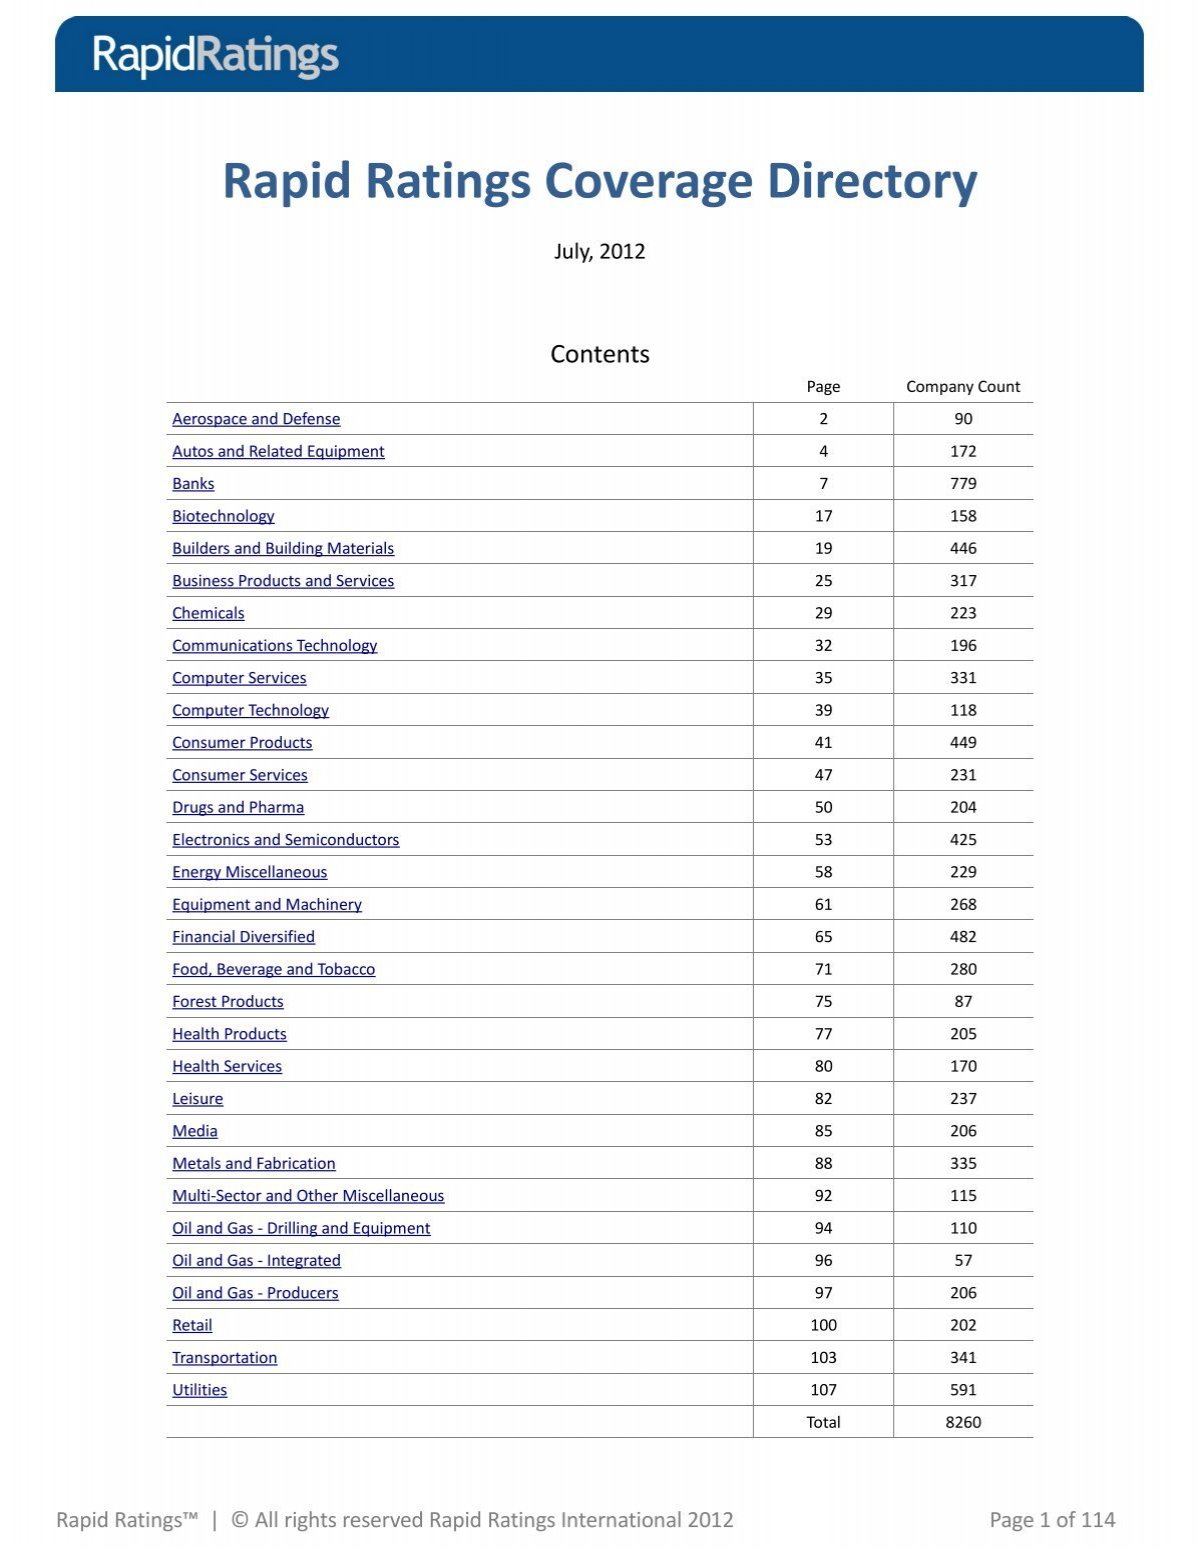 Rapid Ratings Coverage Directory